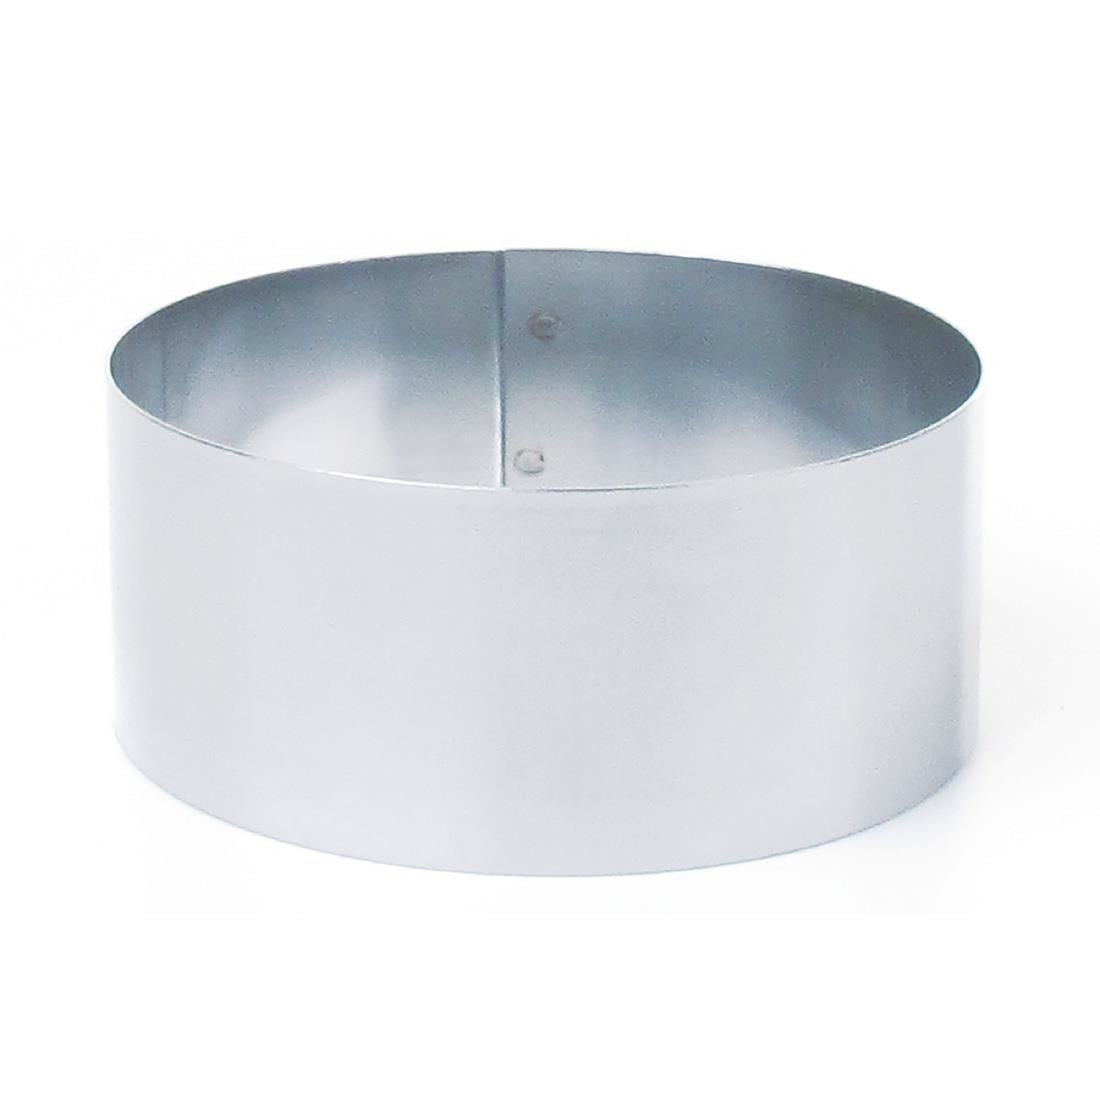 Mafter Stainless Steel Mousse Ring 140 x 60mm JD Catering Equipment Solutions Ltd